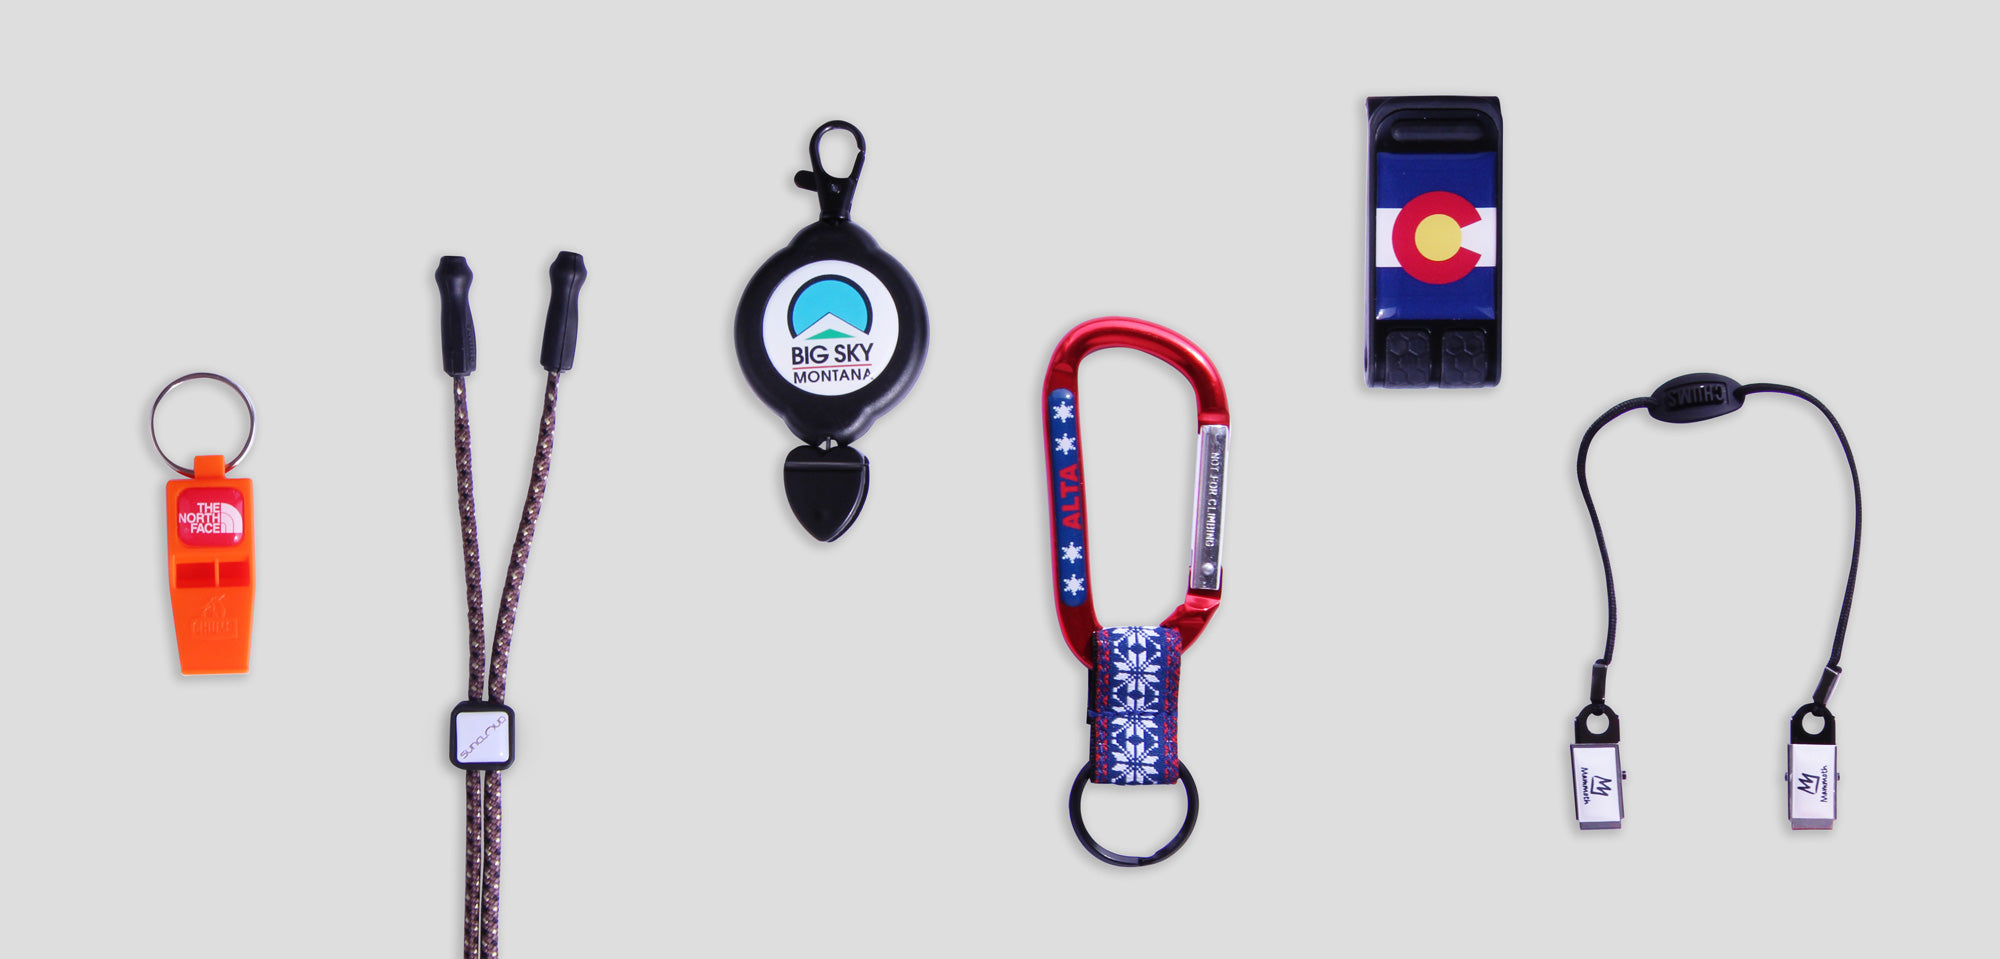 Examples of customized Chums products.